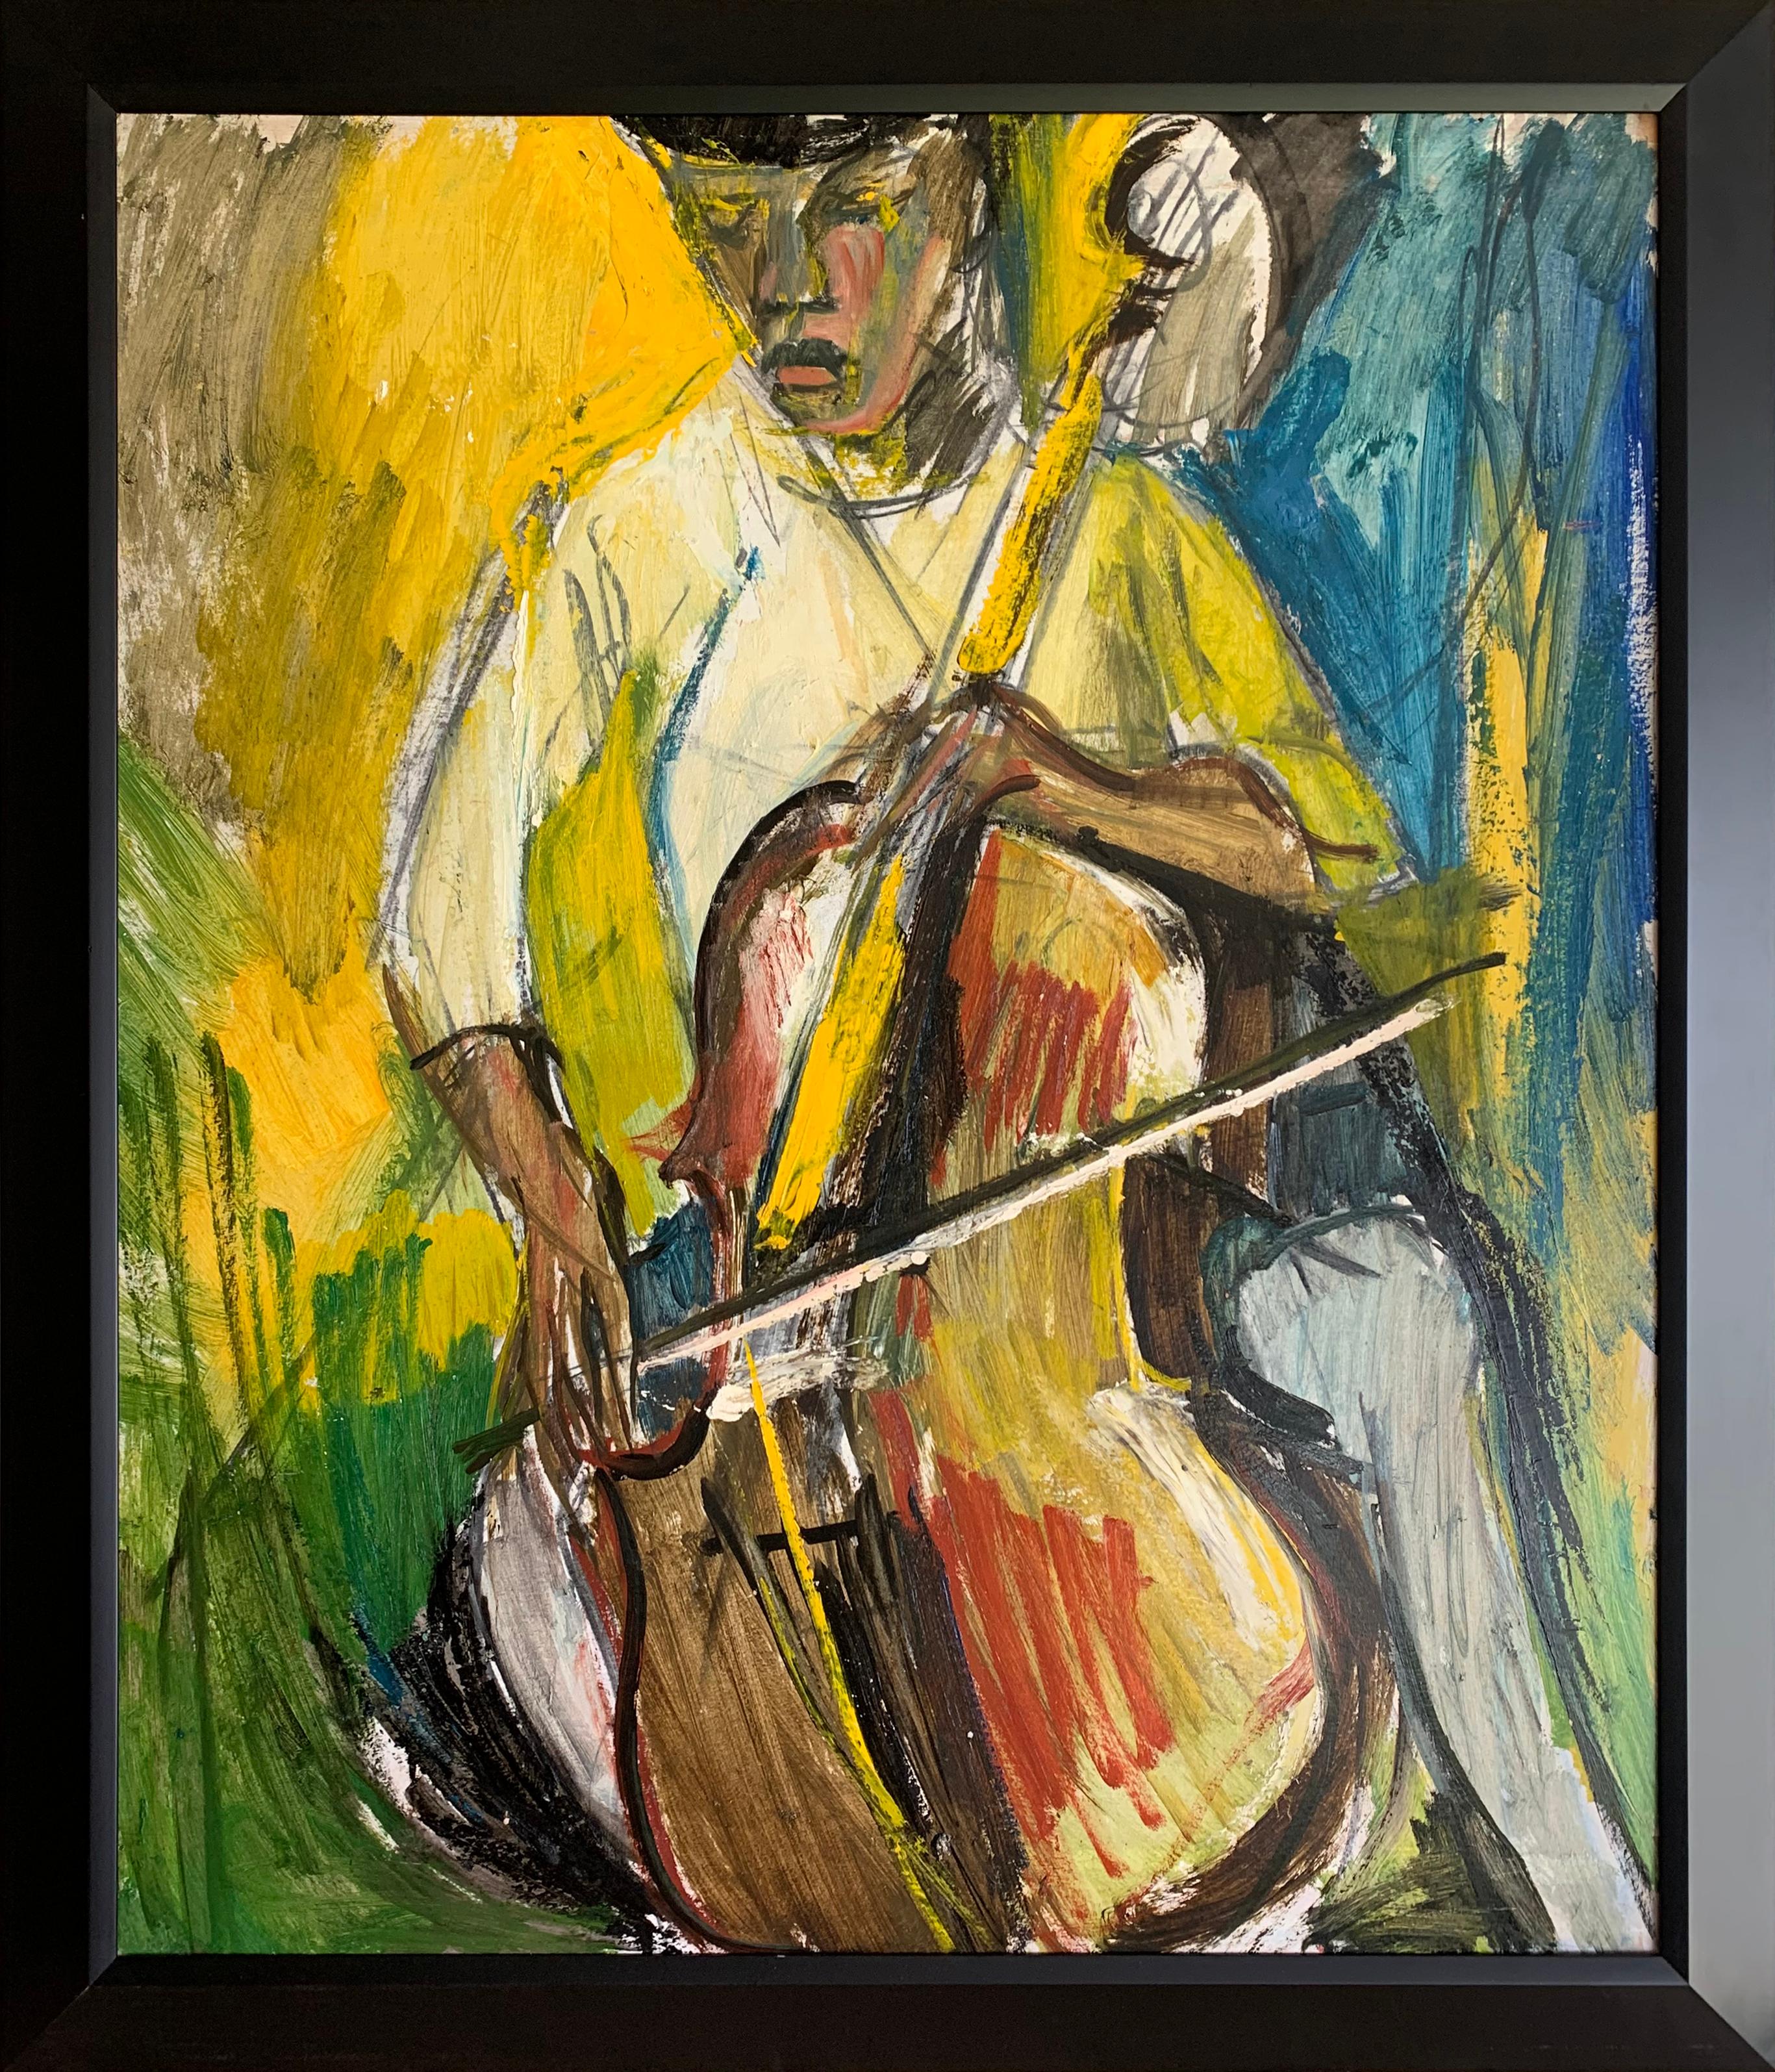 Upright Bass, Expressionist Portrait of Musician by Philadelphia Artist - Painting by Bernard Harmon